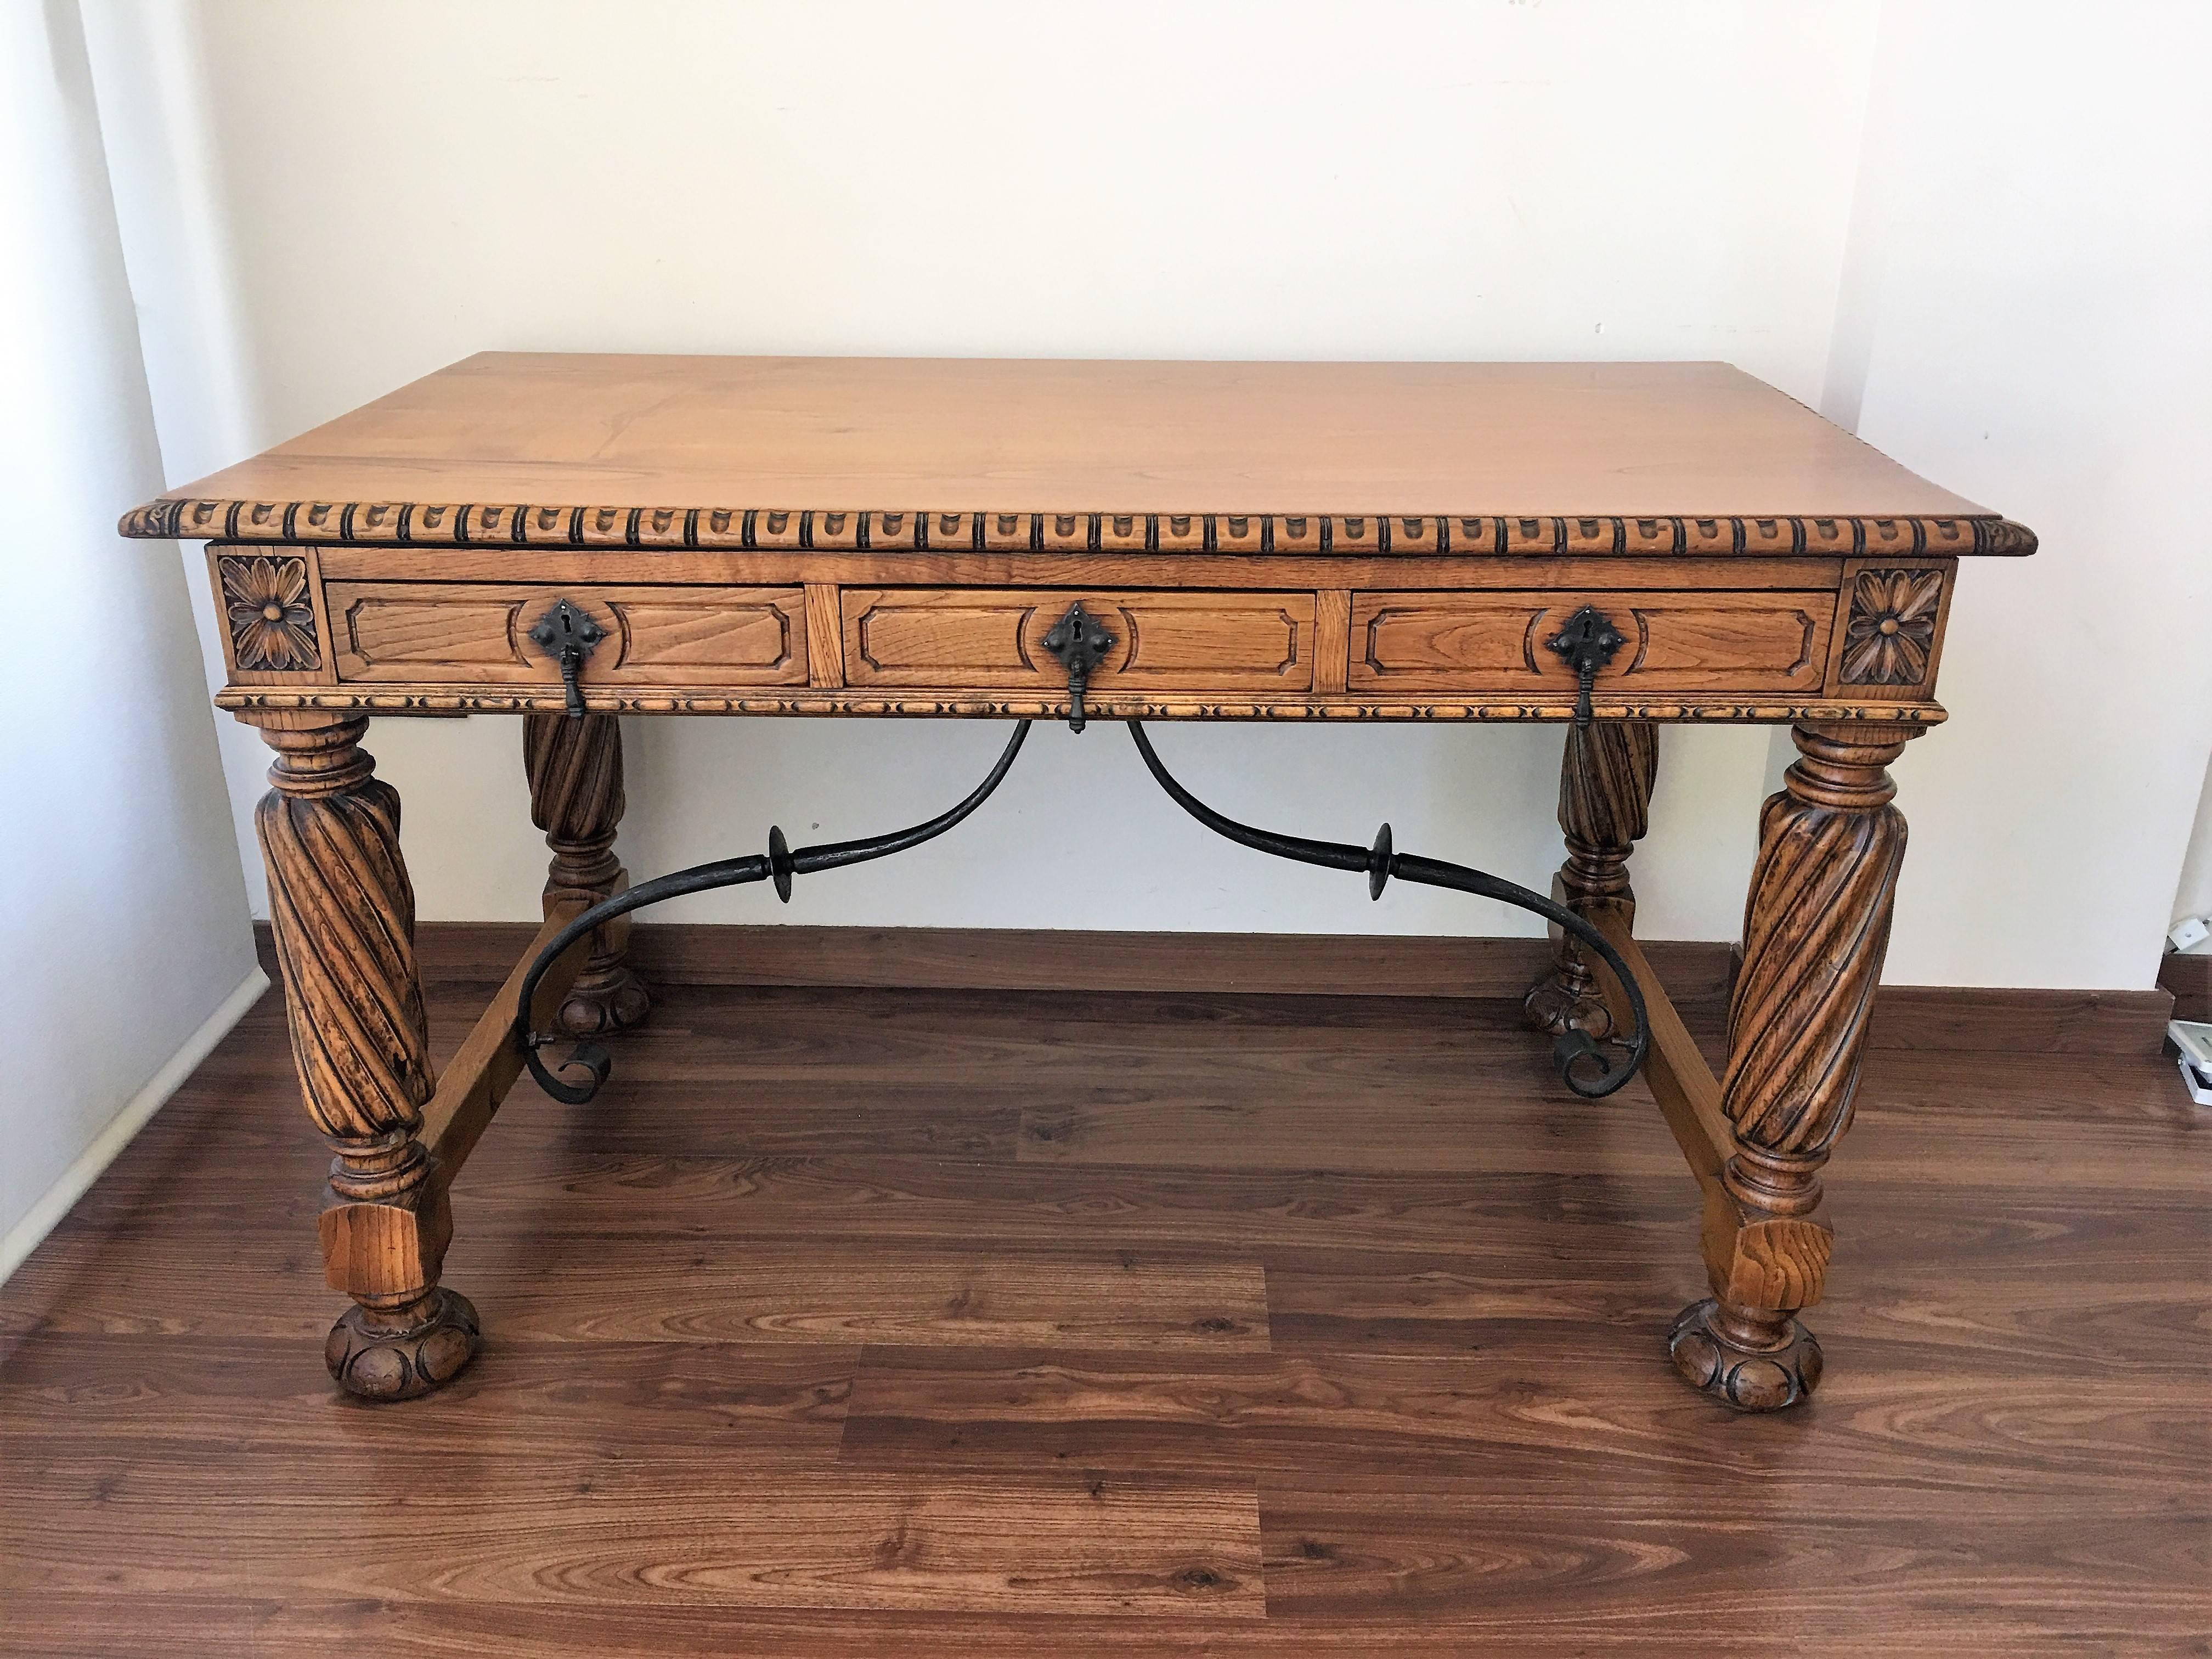 Late 19th Century 19th Century Pine and Wrought Iron Desk with Three Drawers with Turning Legs